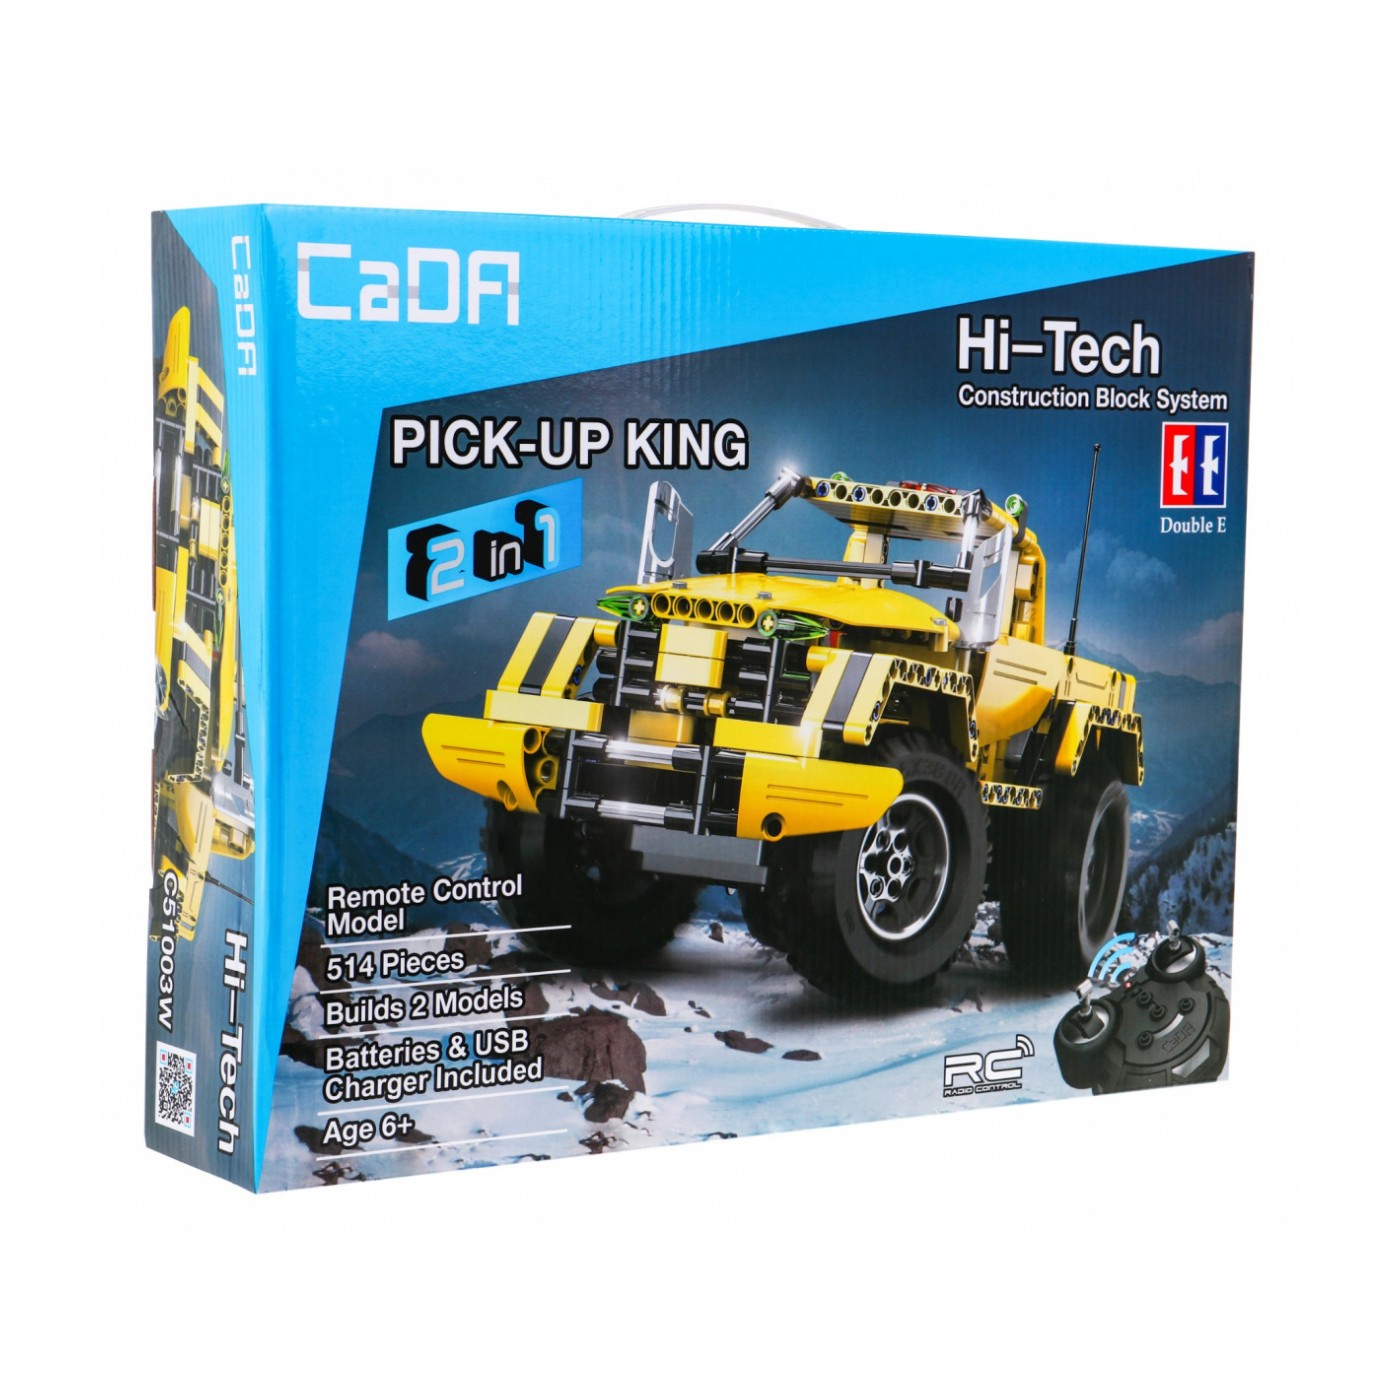 The Pads R/C Off-road Toy Car Yellow EE